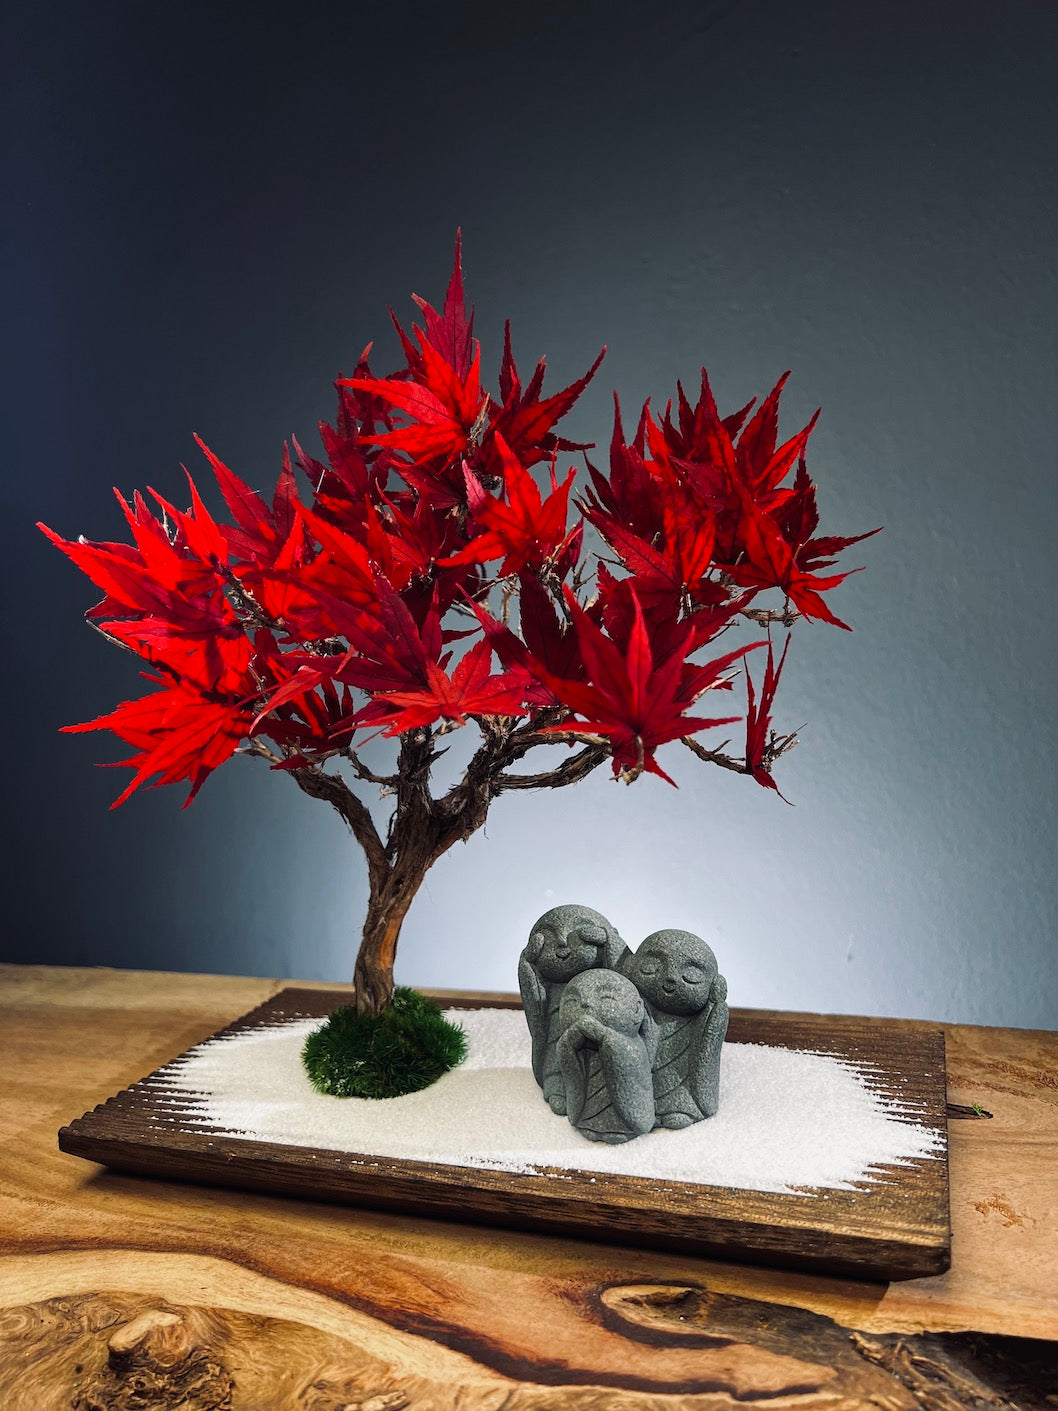 Theatre of Autumn - Flaming Maple - Smaller version (Preserved Plants)